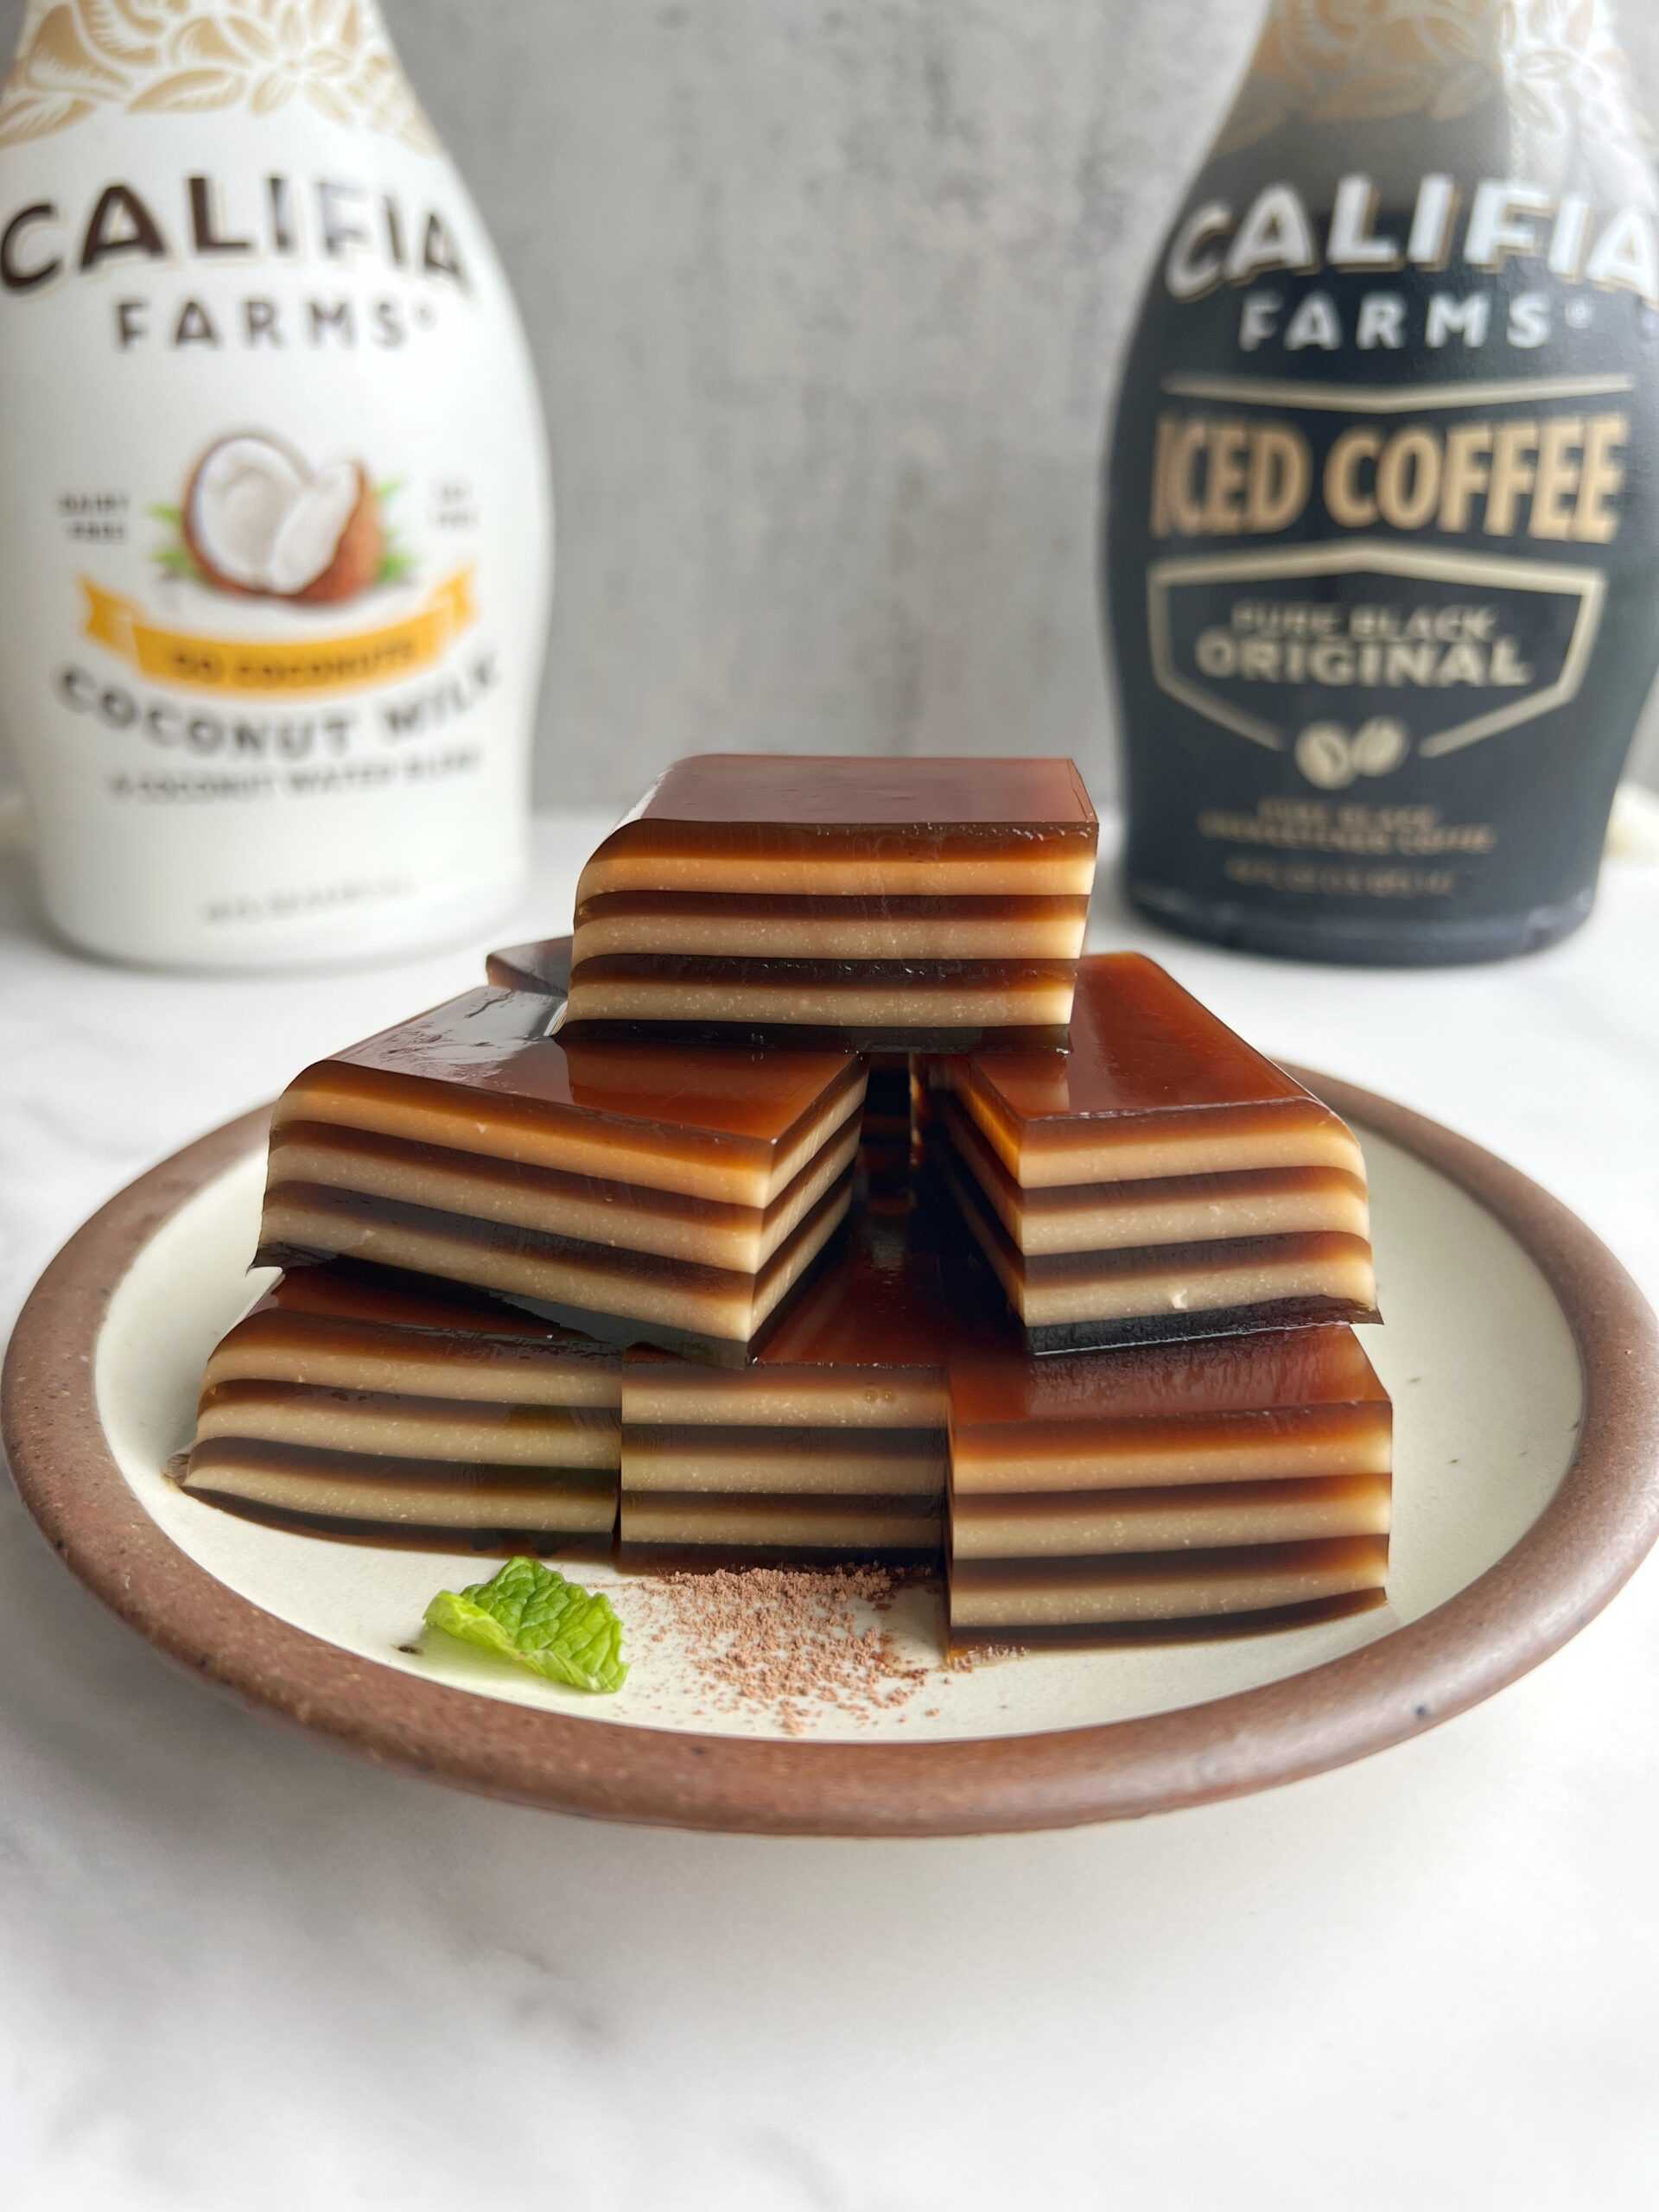 Layered coffee jelly squares sit at the center of the image.